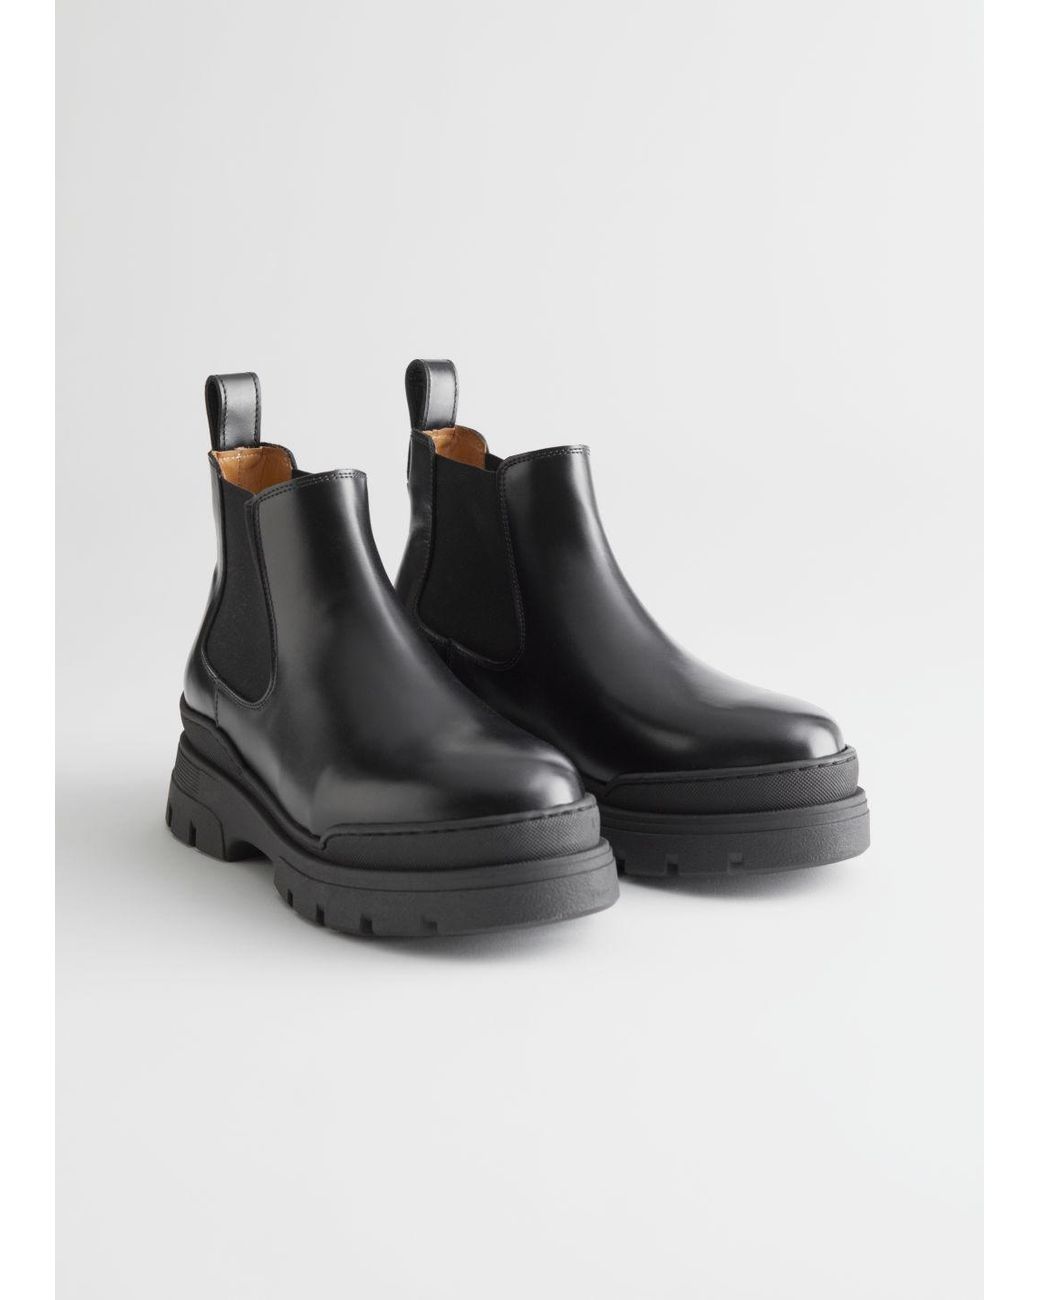 & Other Stories Chunky Leather Chelsea Boots in Black | Lyst